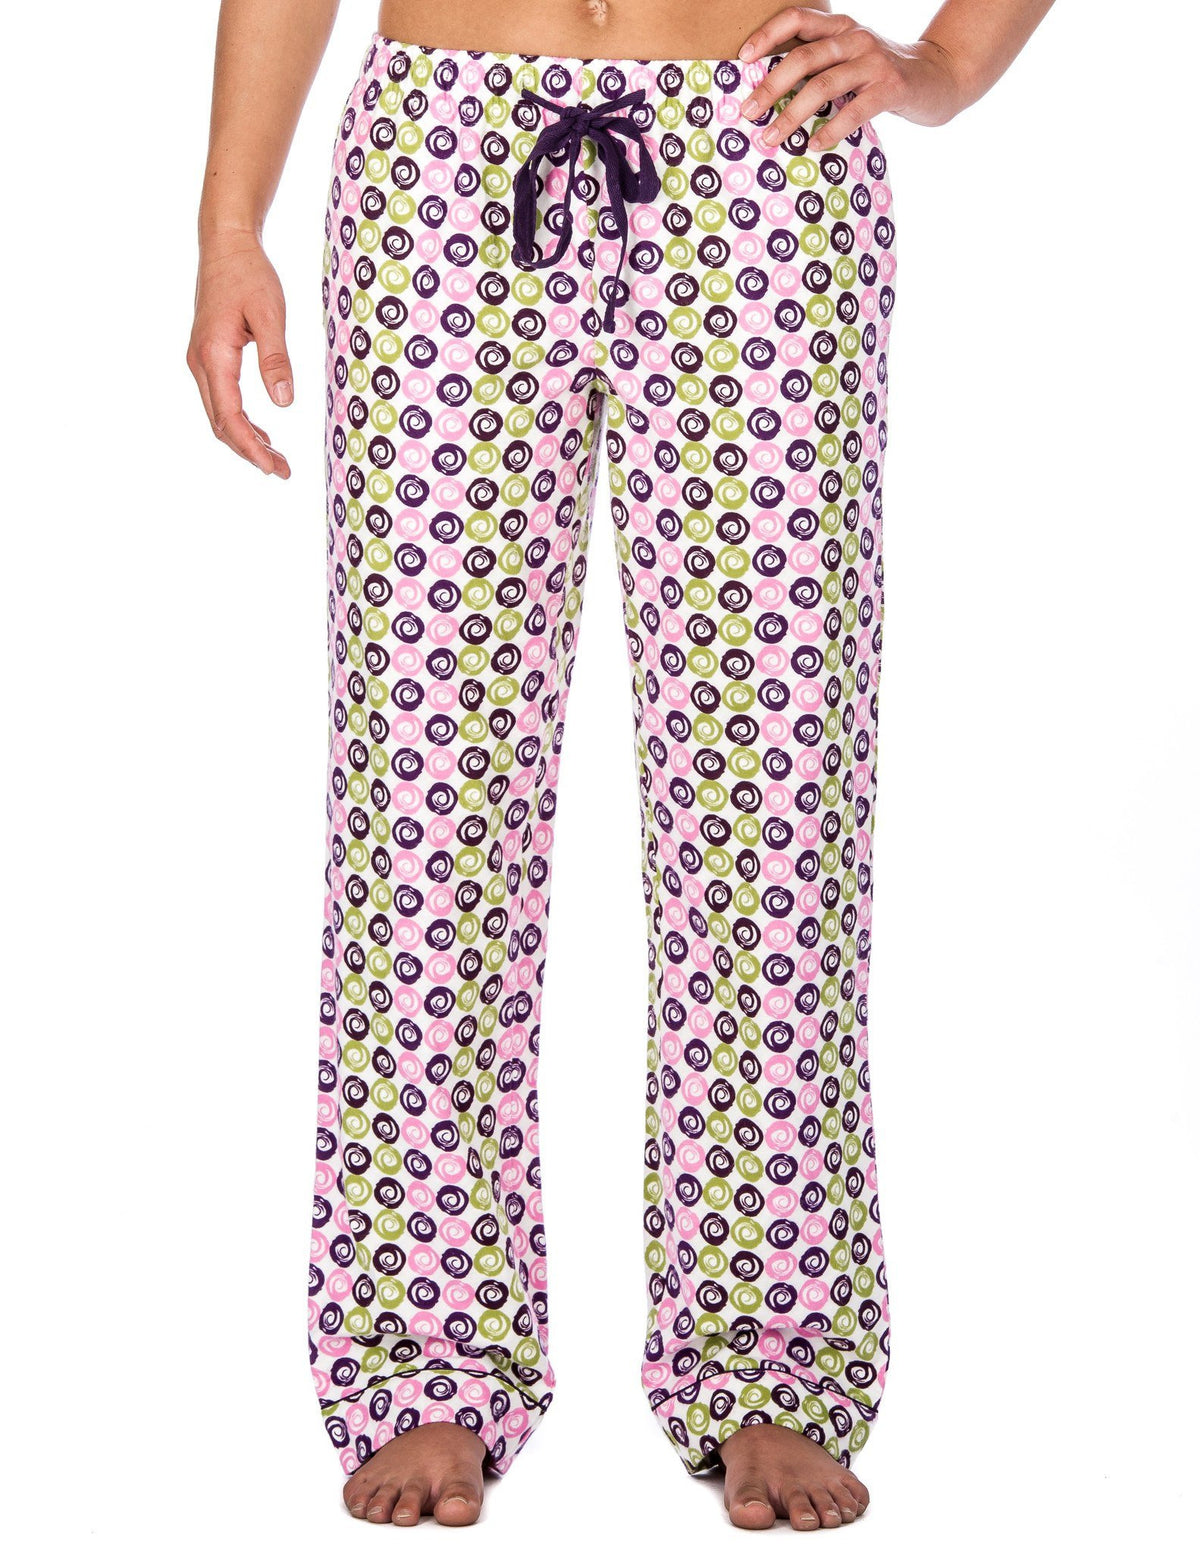 Relaxed Fit Womens Premium 100% Cotton Flannel Lounge Pants - Swirly Daze - Purple/Green